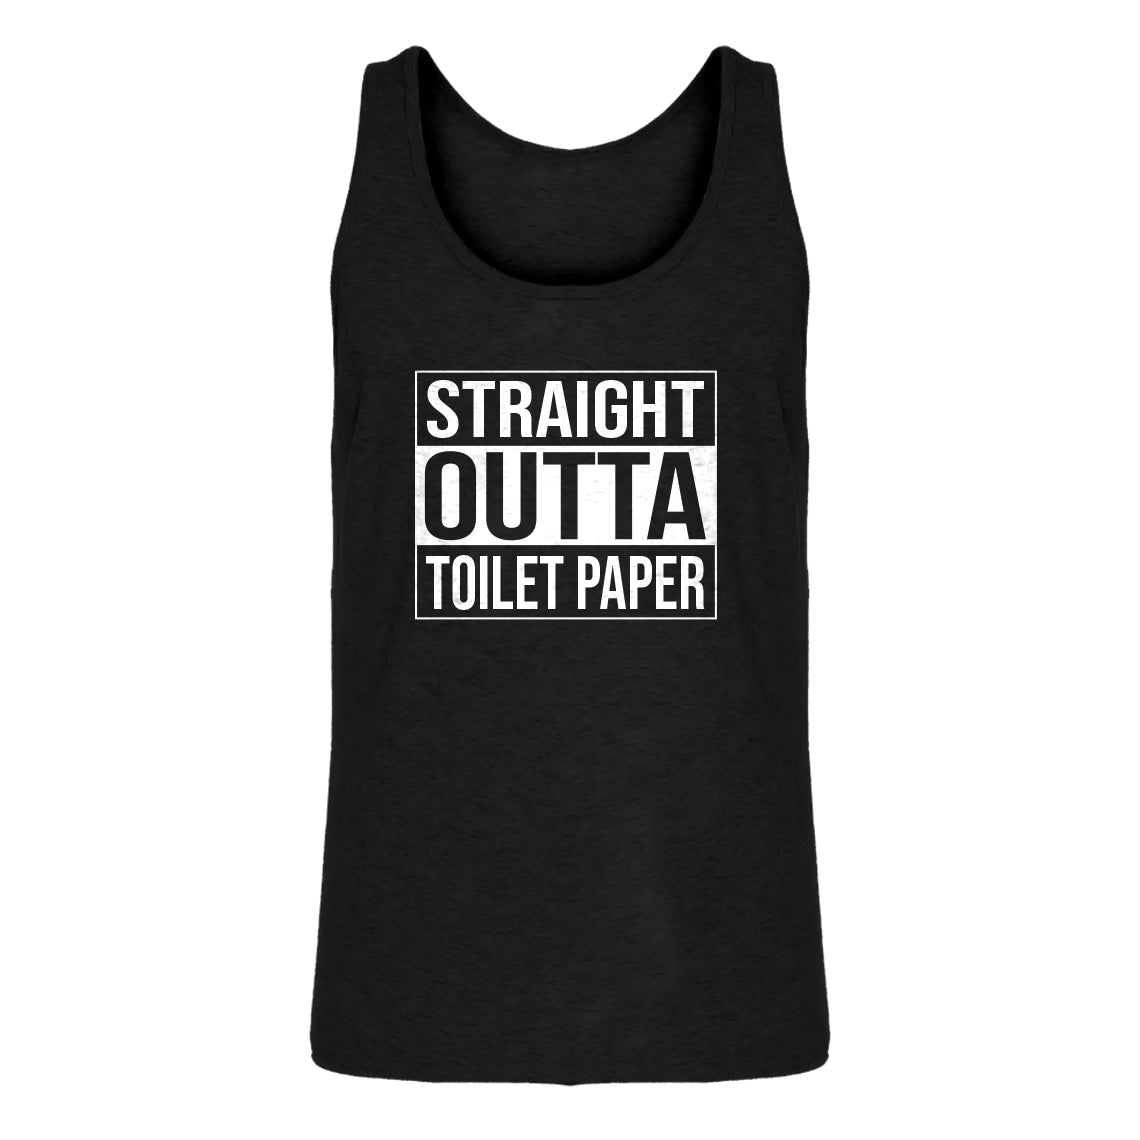 Mens Straight Outta Toilet Paper Jersey Tank Top